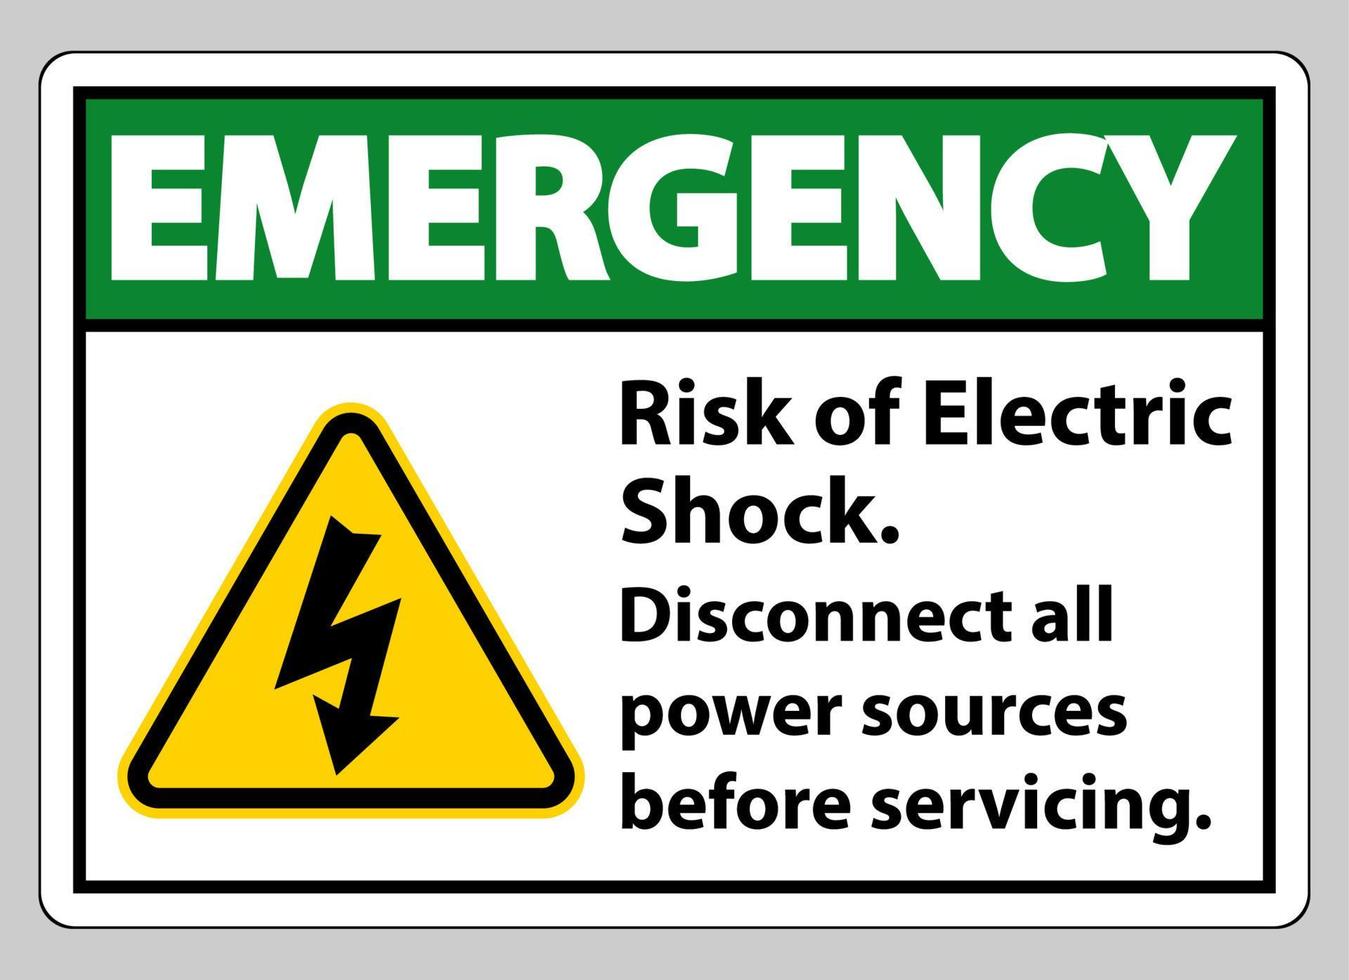 Emergency Risk of electric shock Symbol Sign Isolate on White Background vector